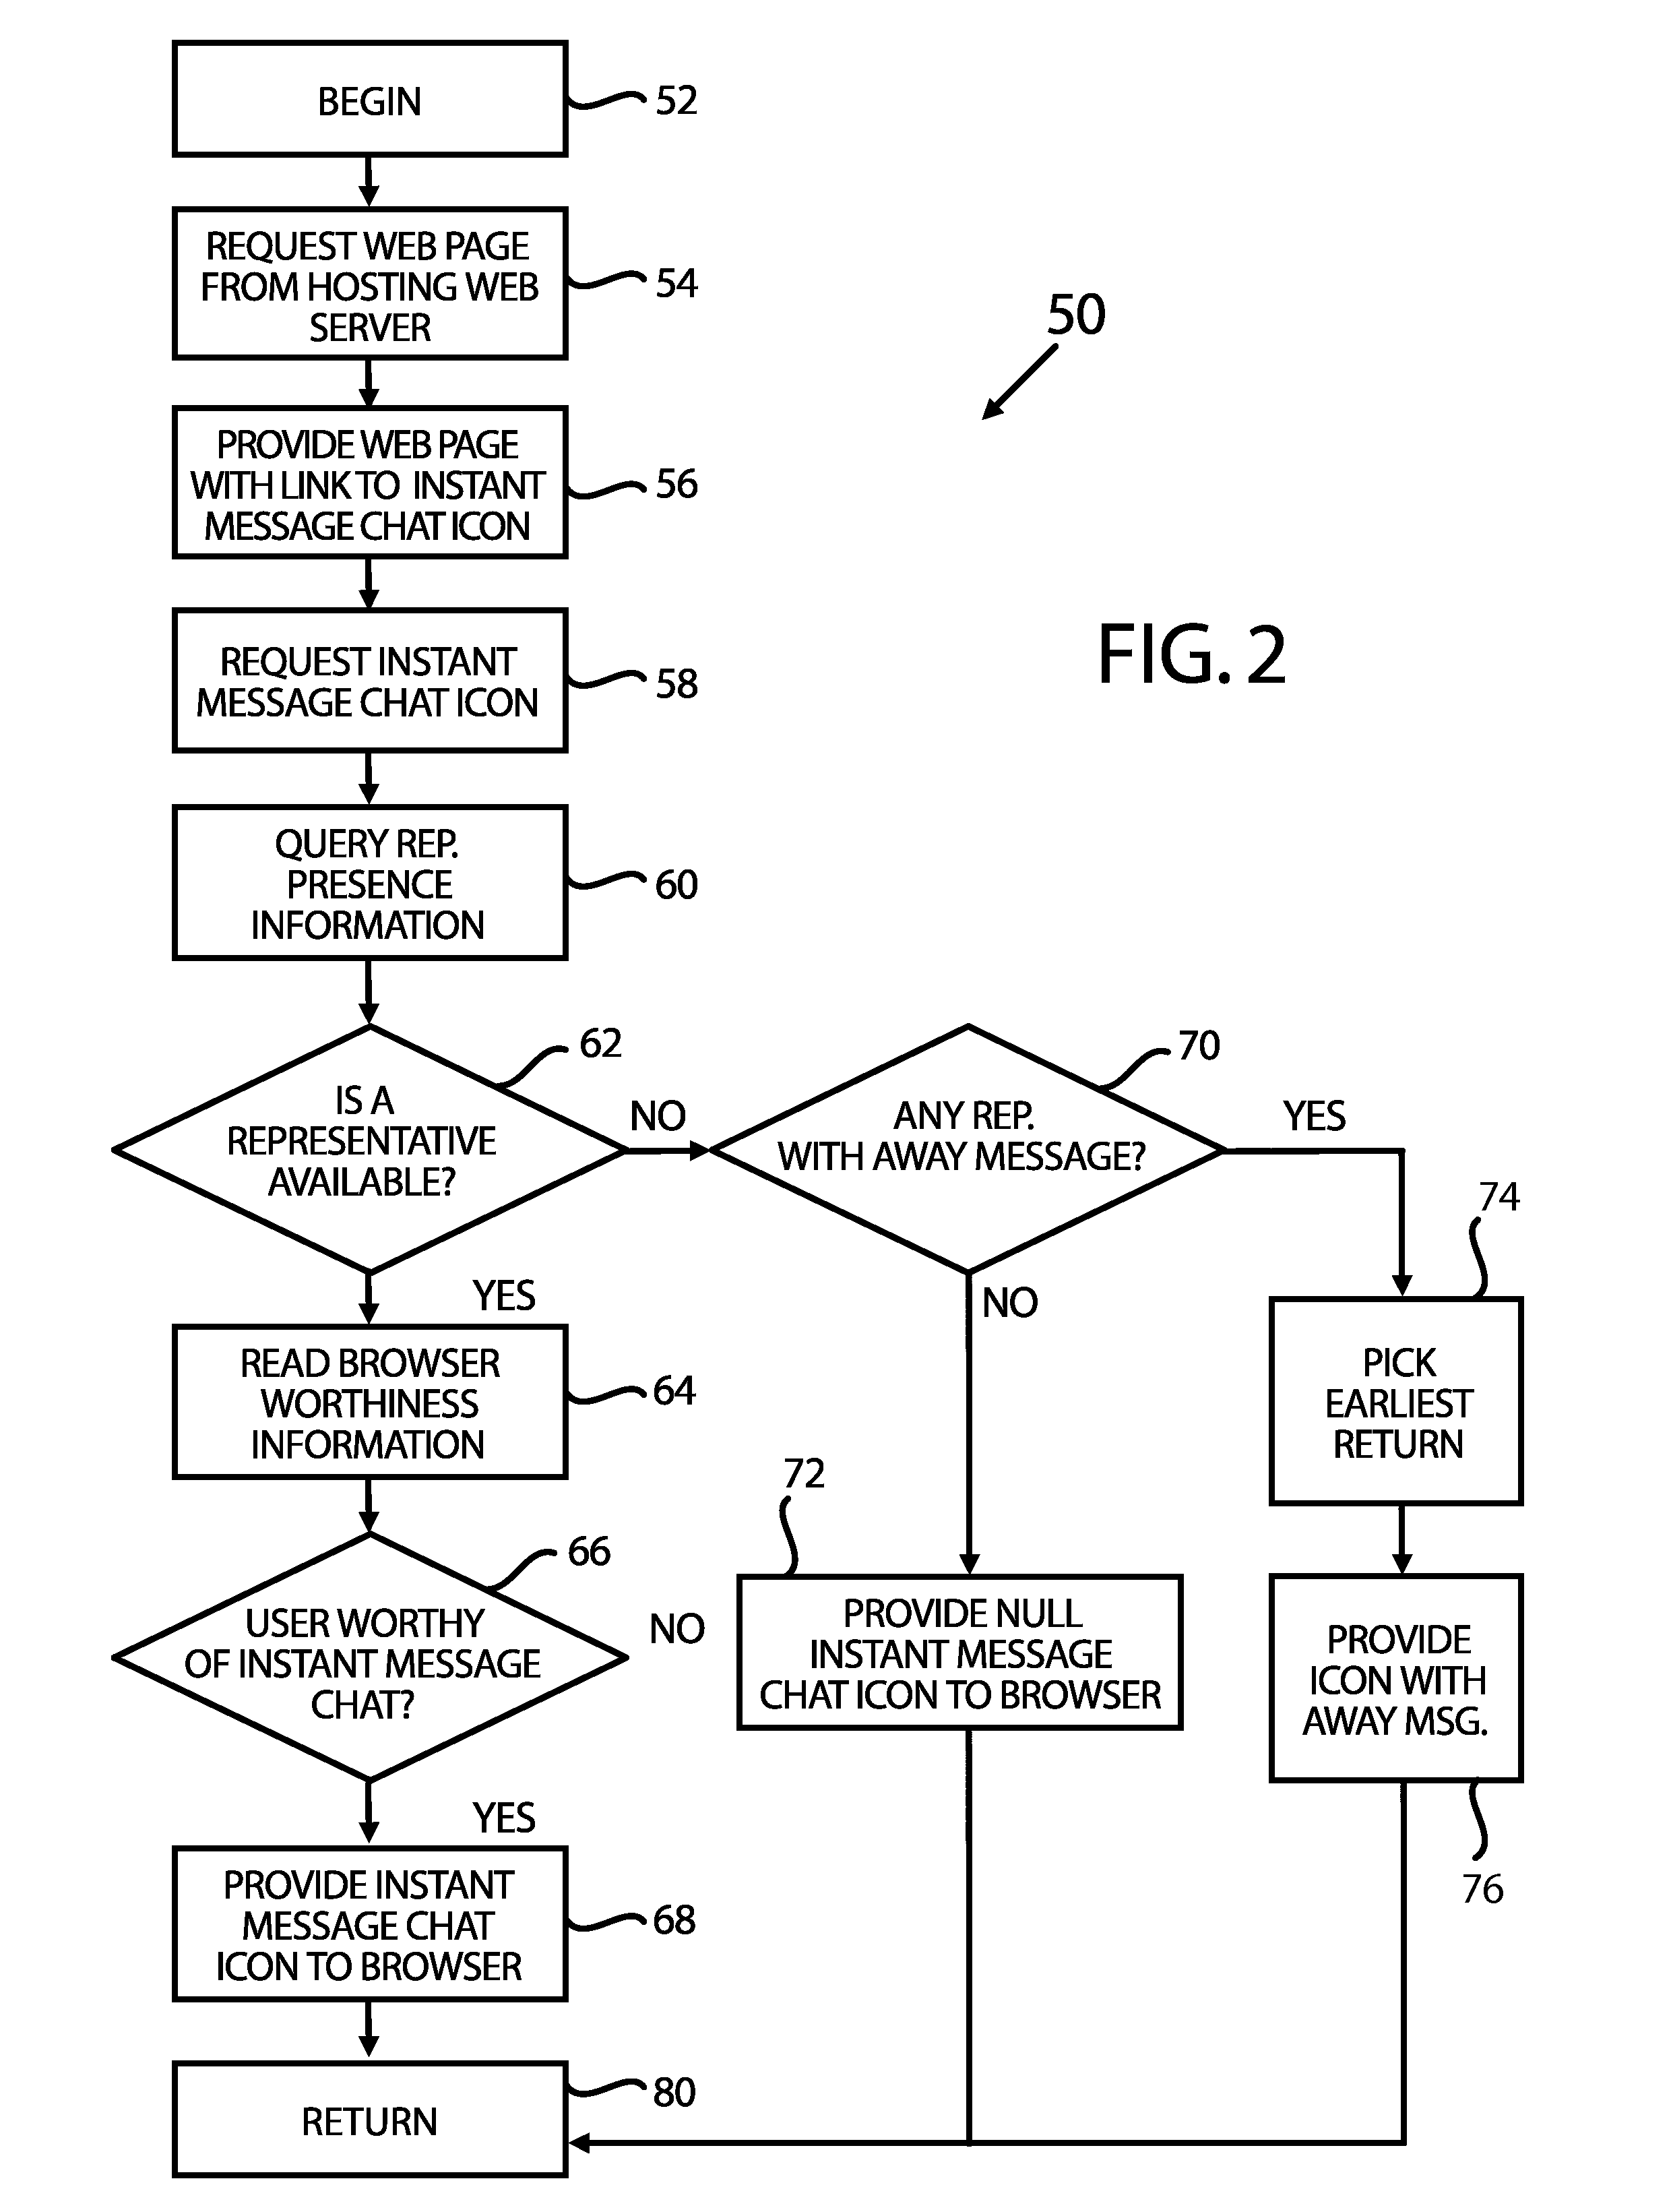 Web-Based User-Dependent Customer Service Interaction with Co-Browsing